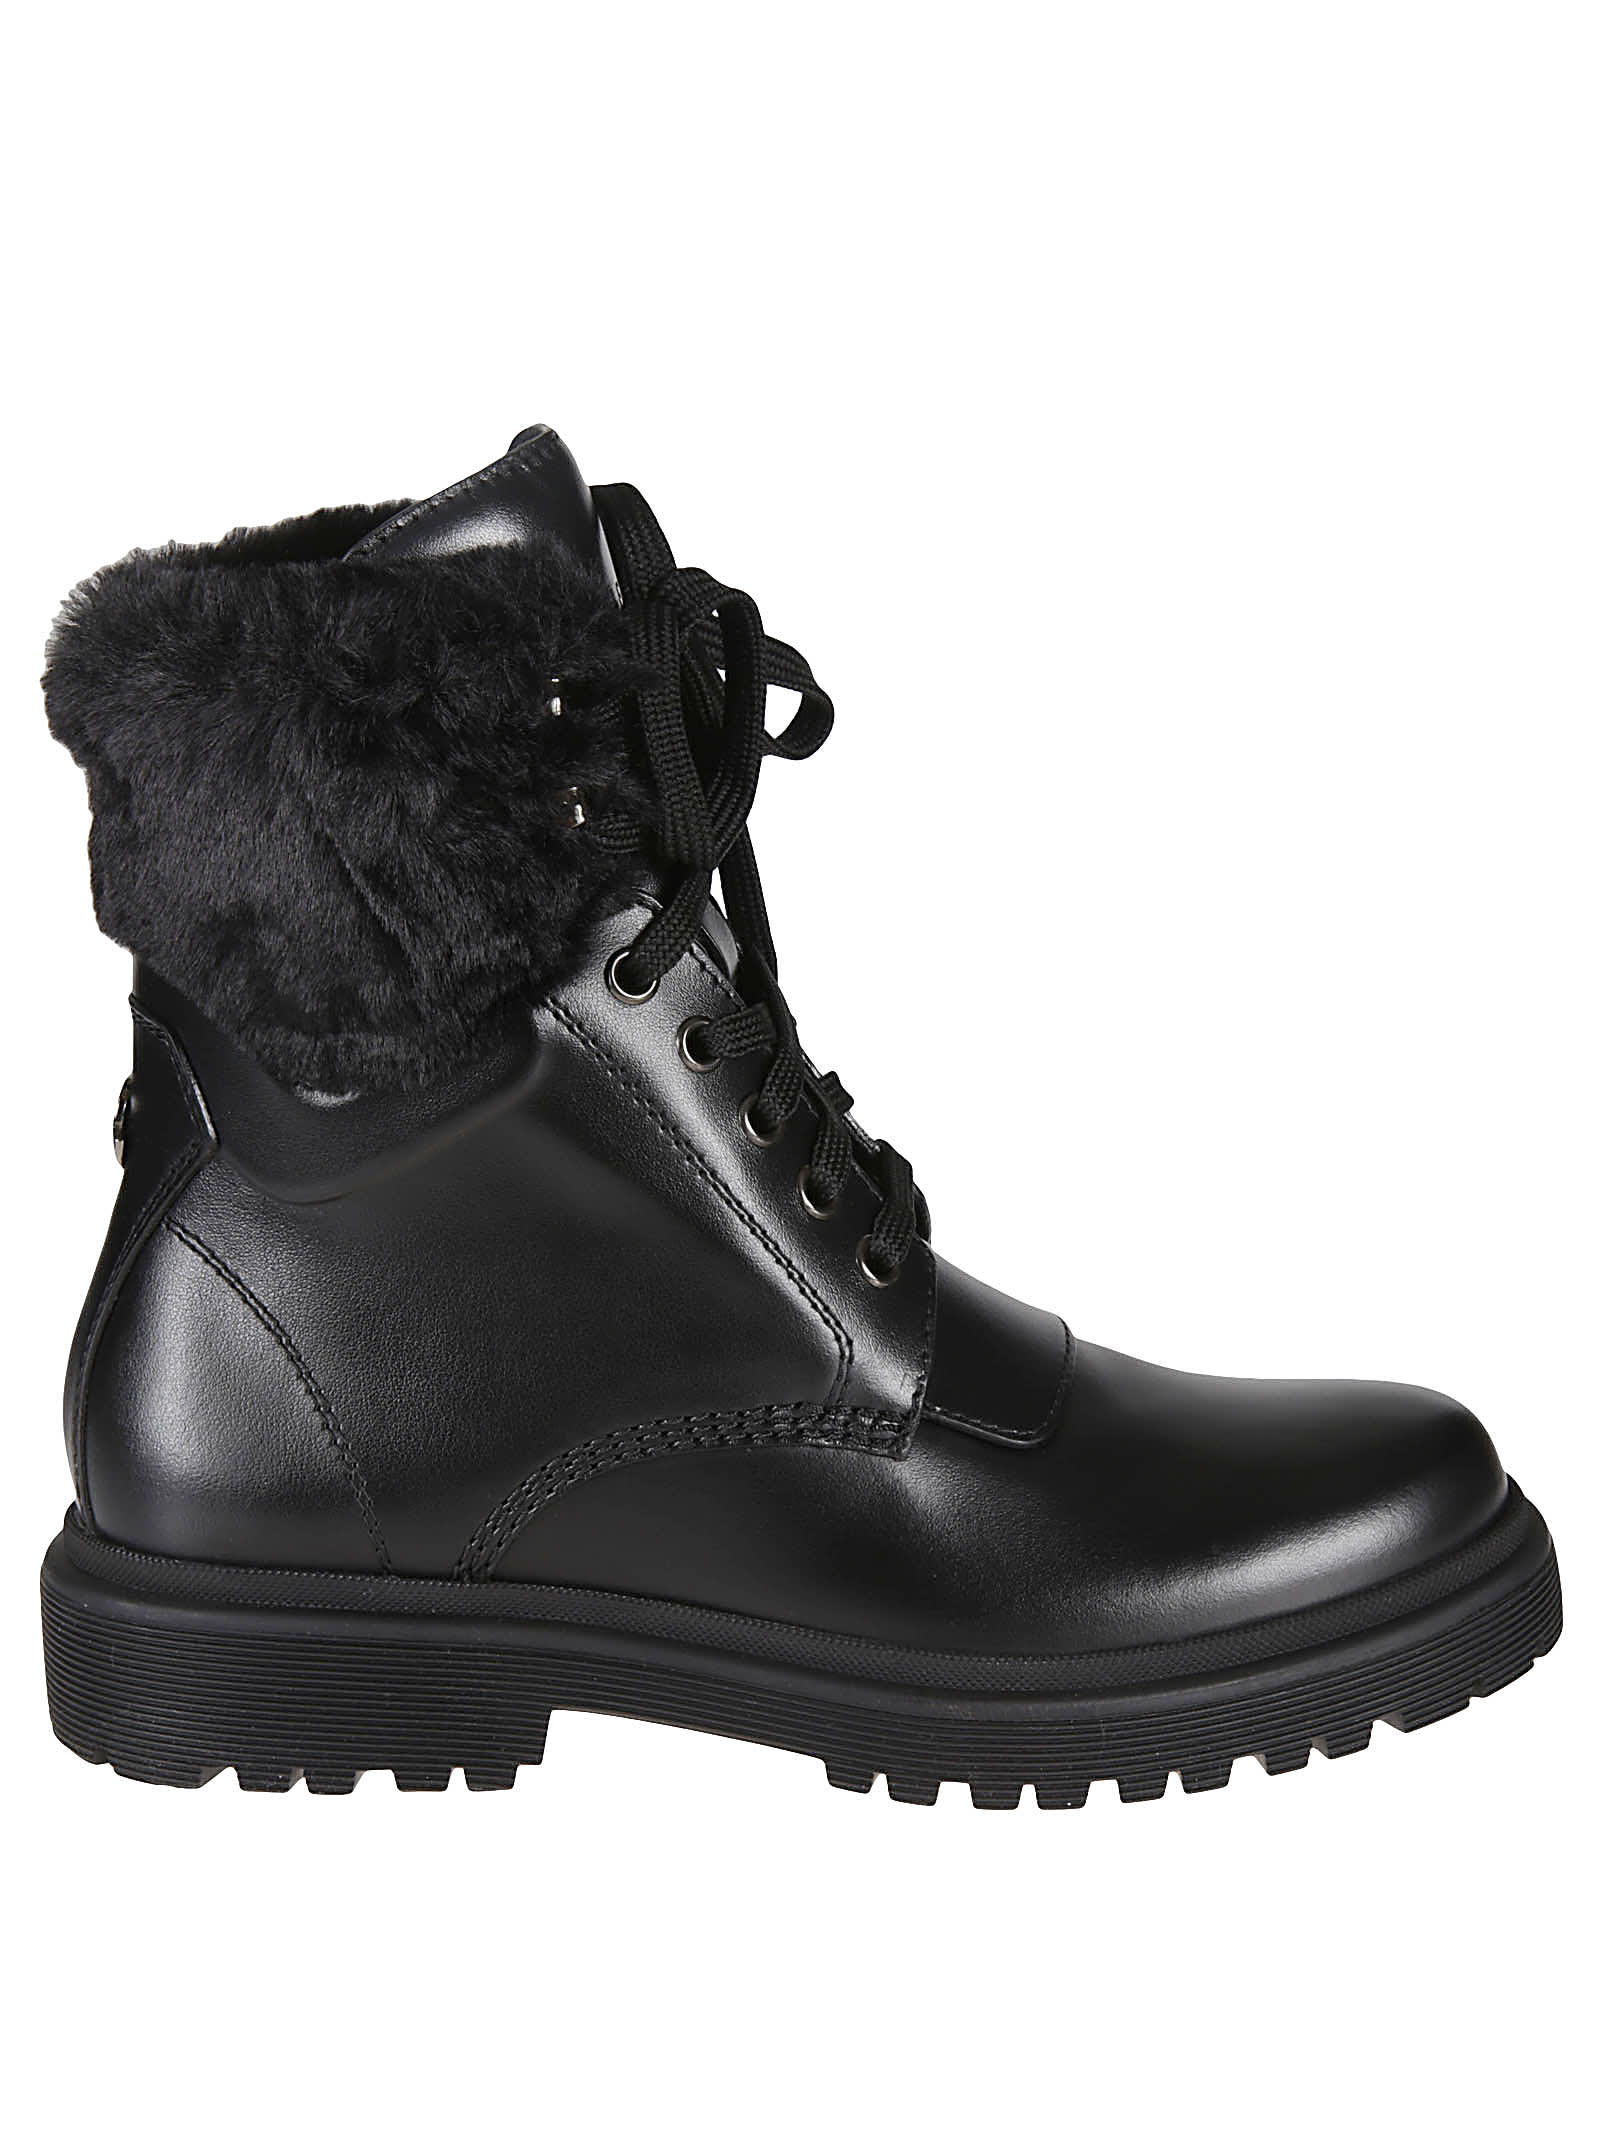 Buy Moncler Patty Lace-up Boots online, shop Moncler shoes with free shipping